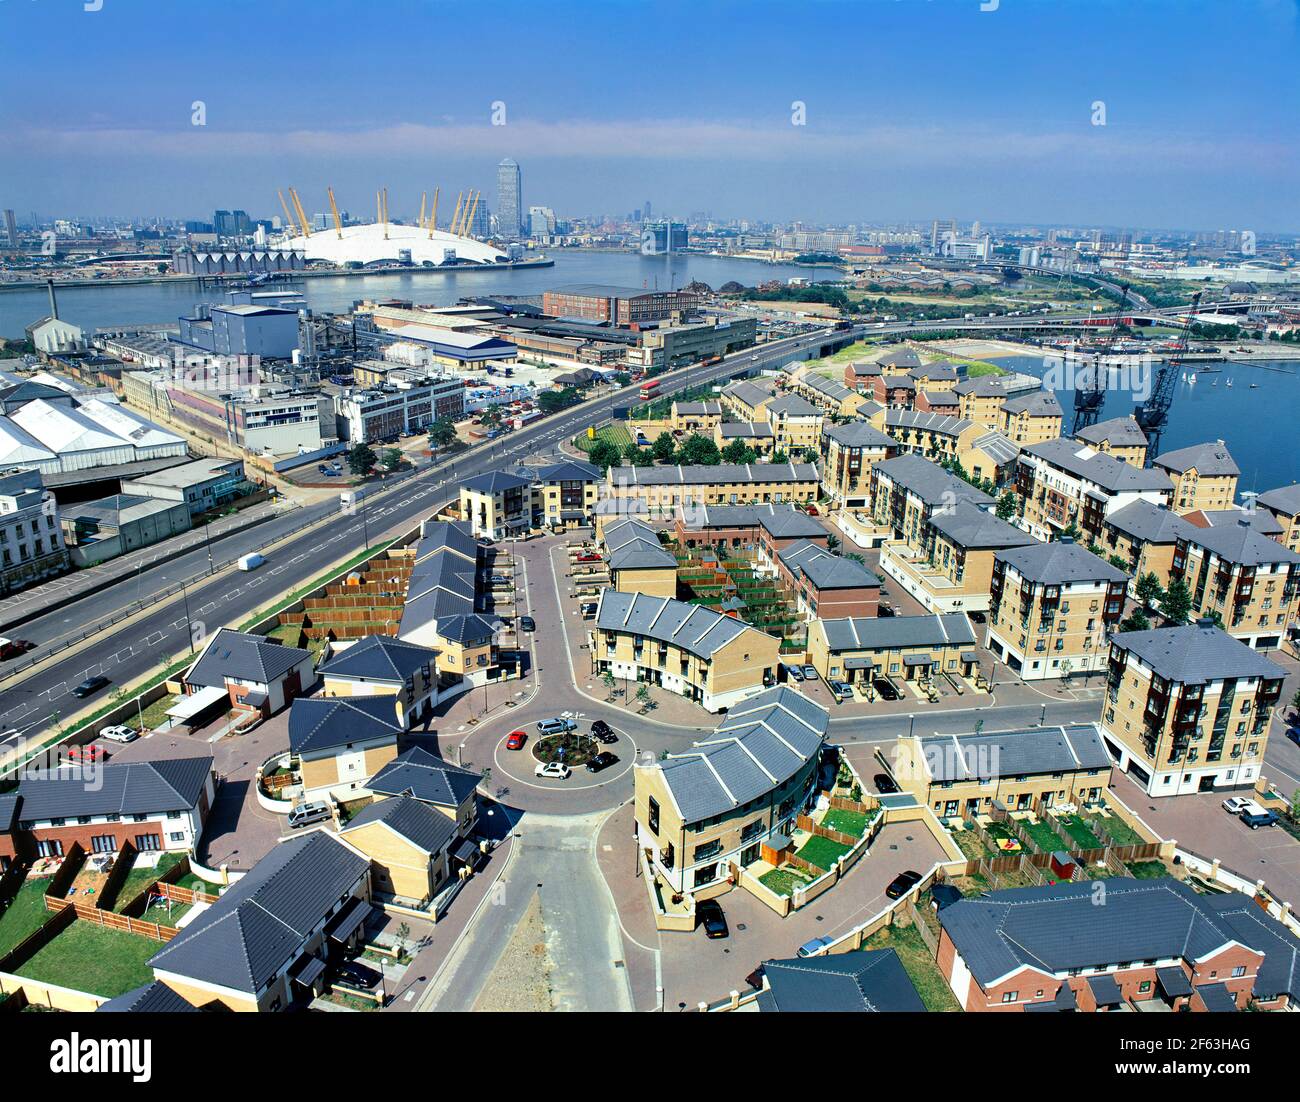 Part of the London Docklands redevelopment area with Britannia Village in the foreground and the Millenium Dome beyond by the Thames. Stock Photo